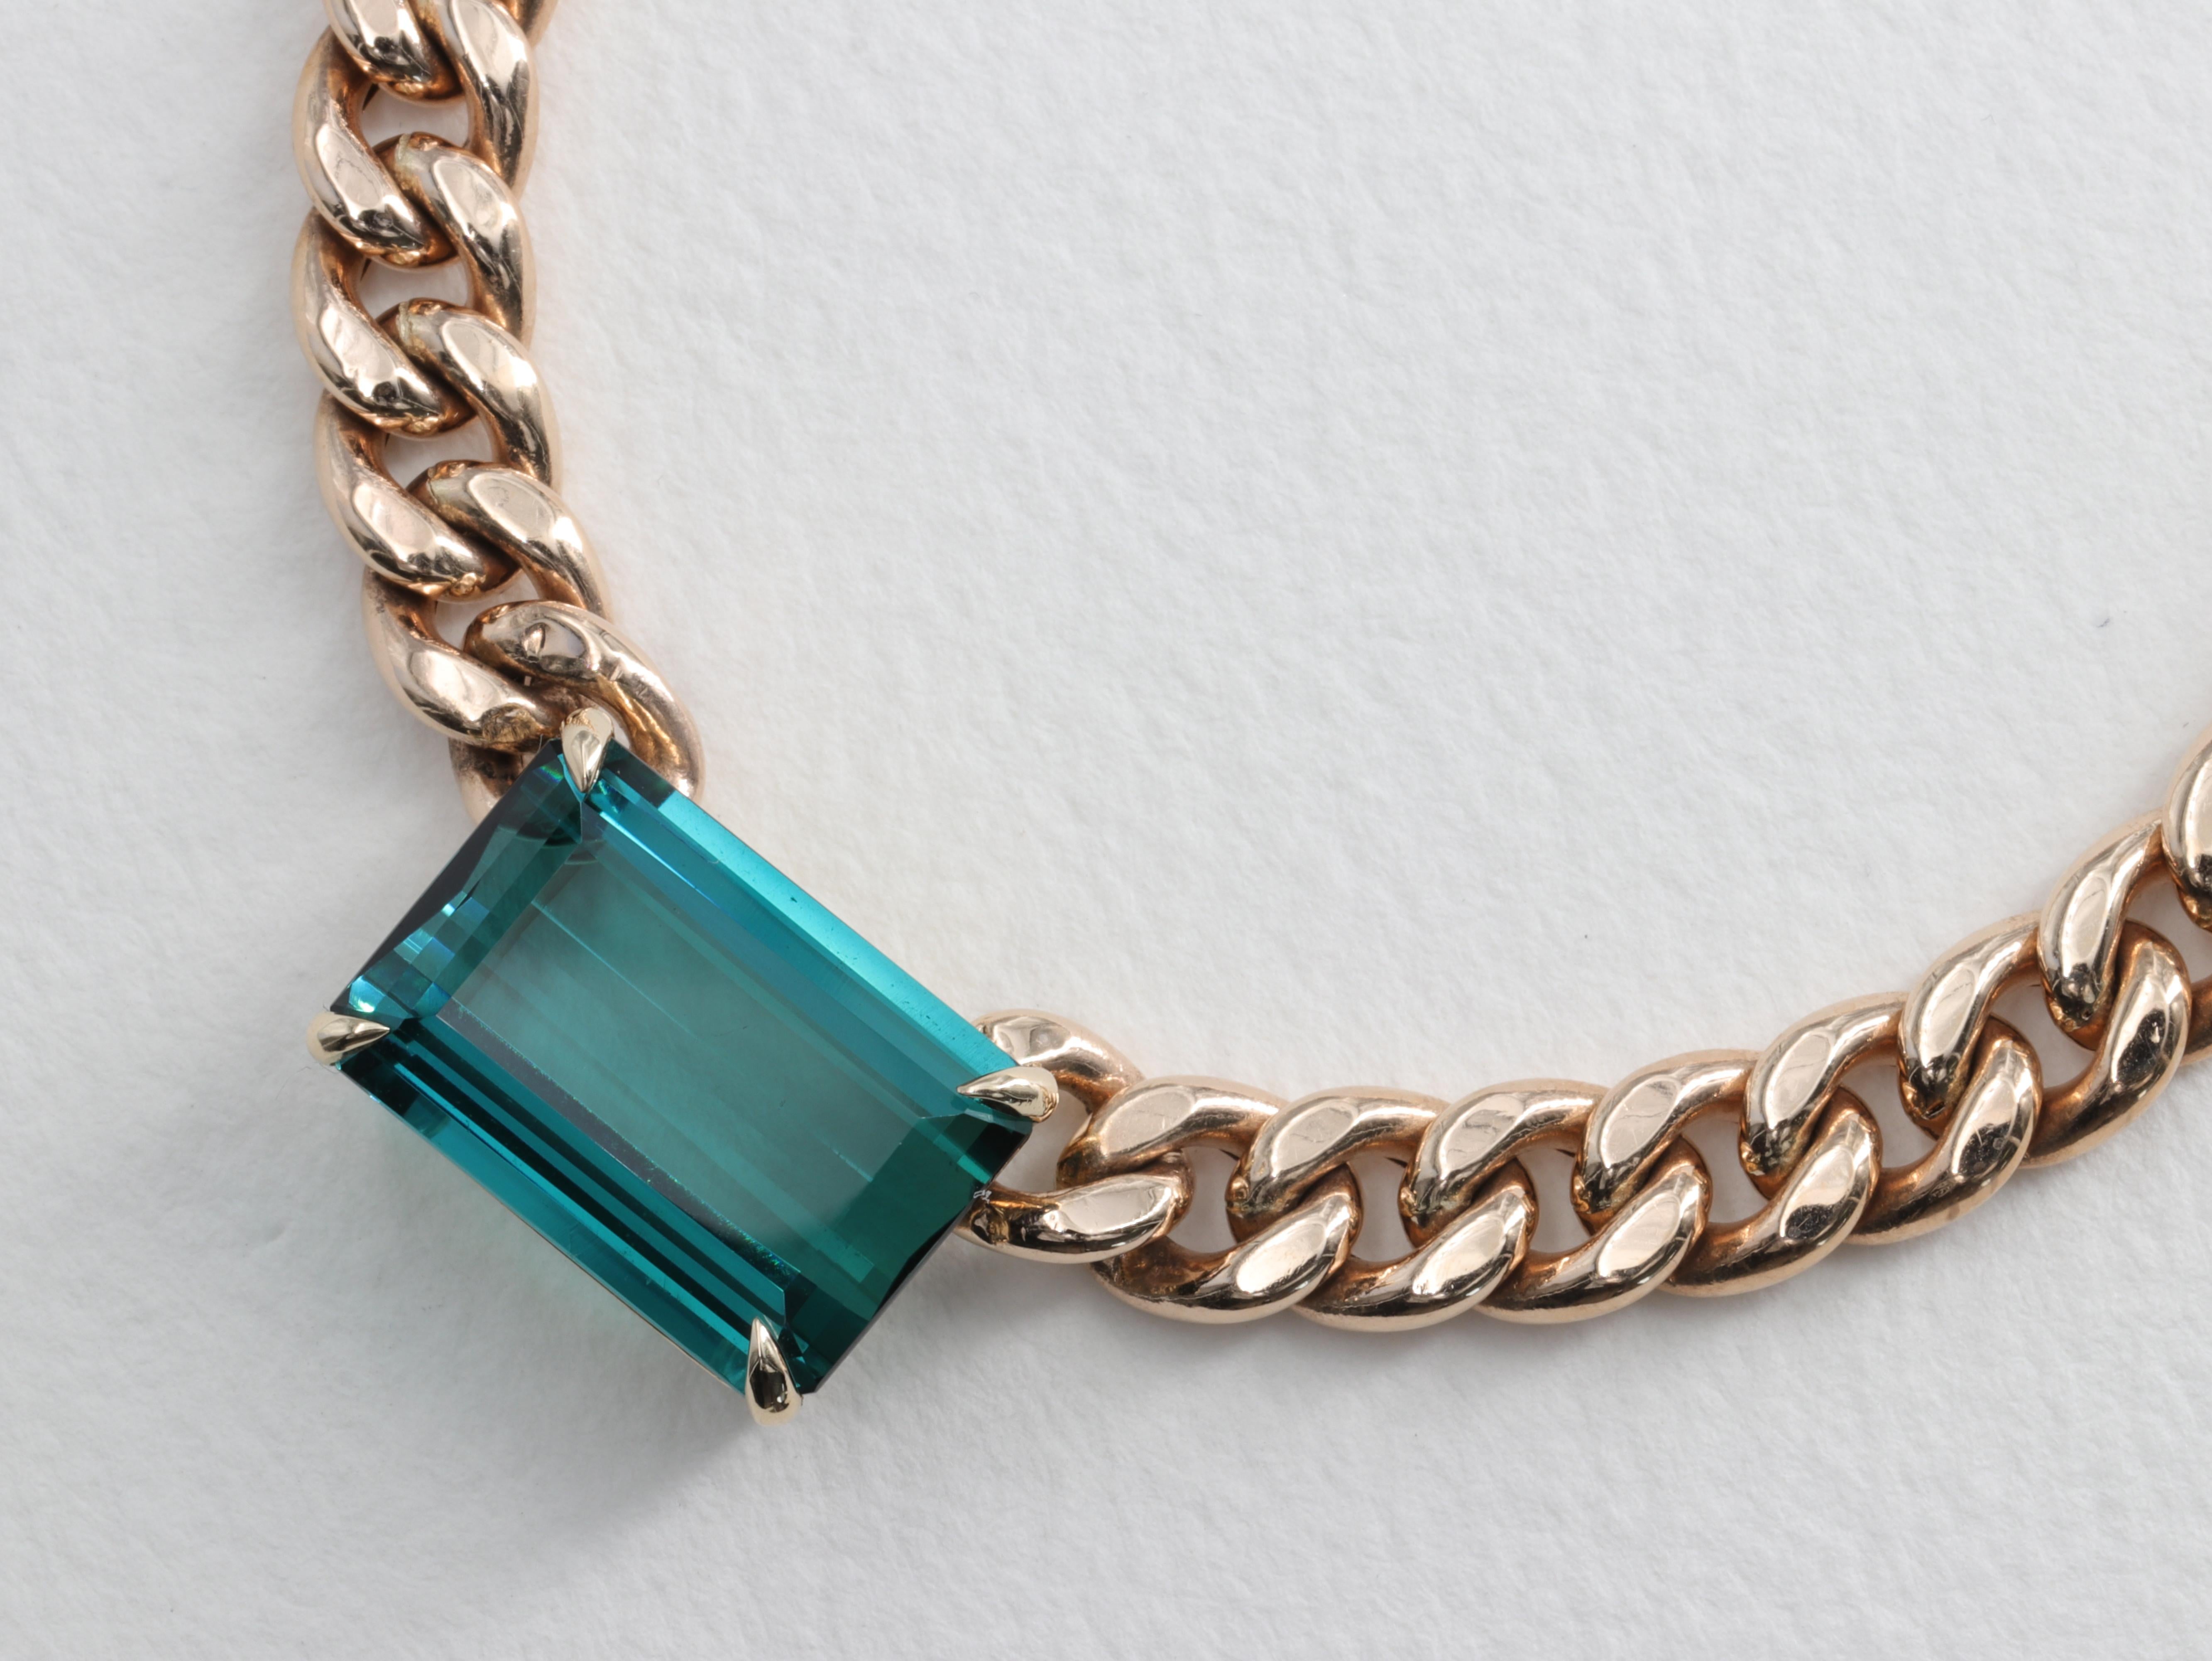 Emerald Cut Exceptional Indicolite Tourmaline Necklace Vintage Curb Link Yellow Gold Chain